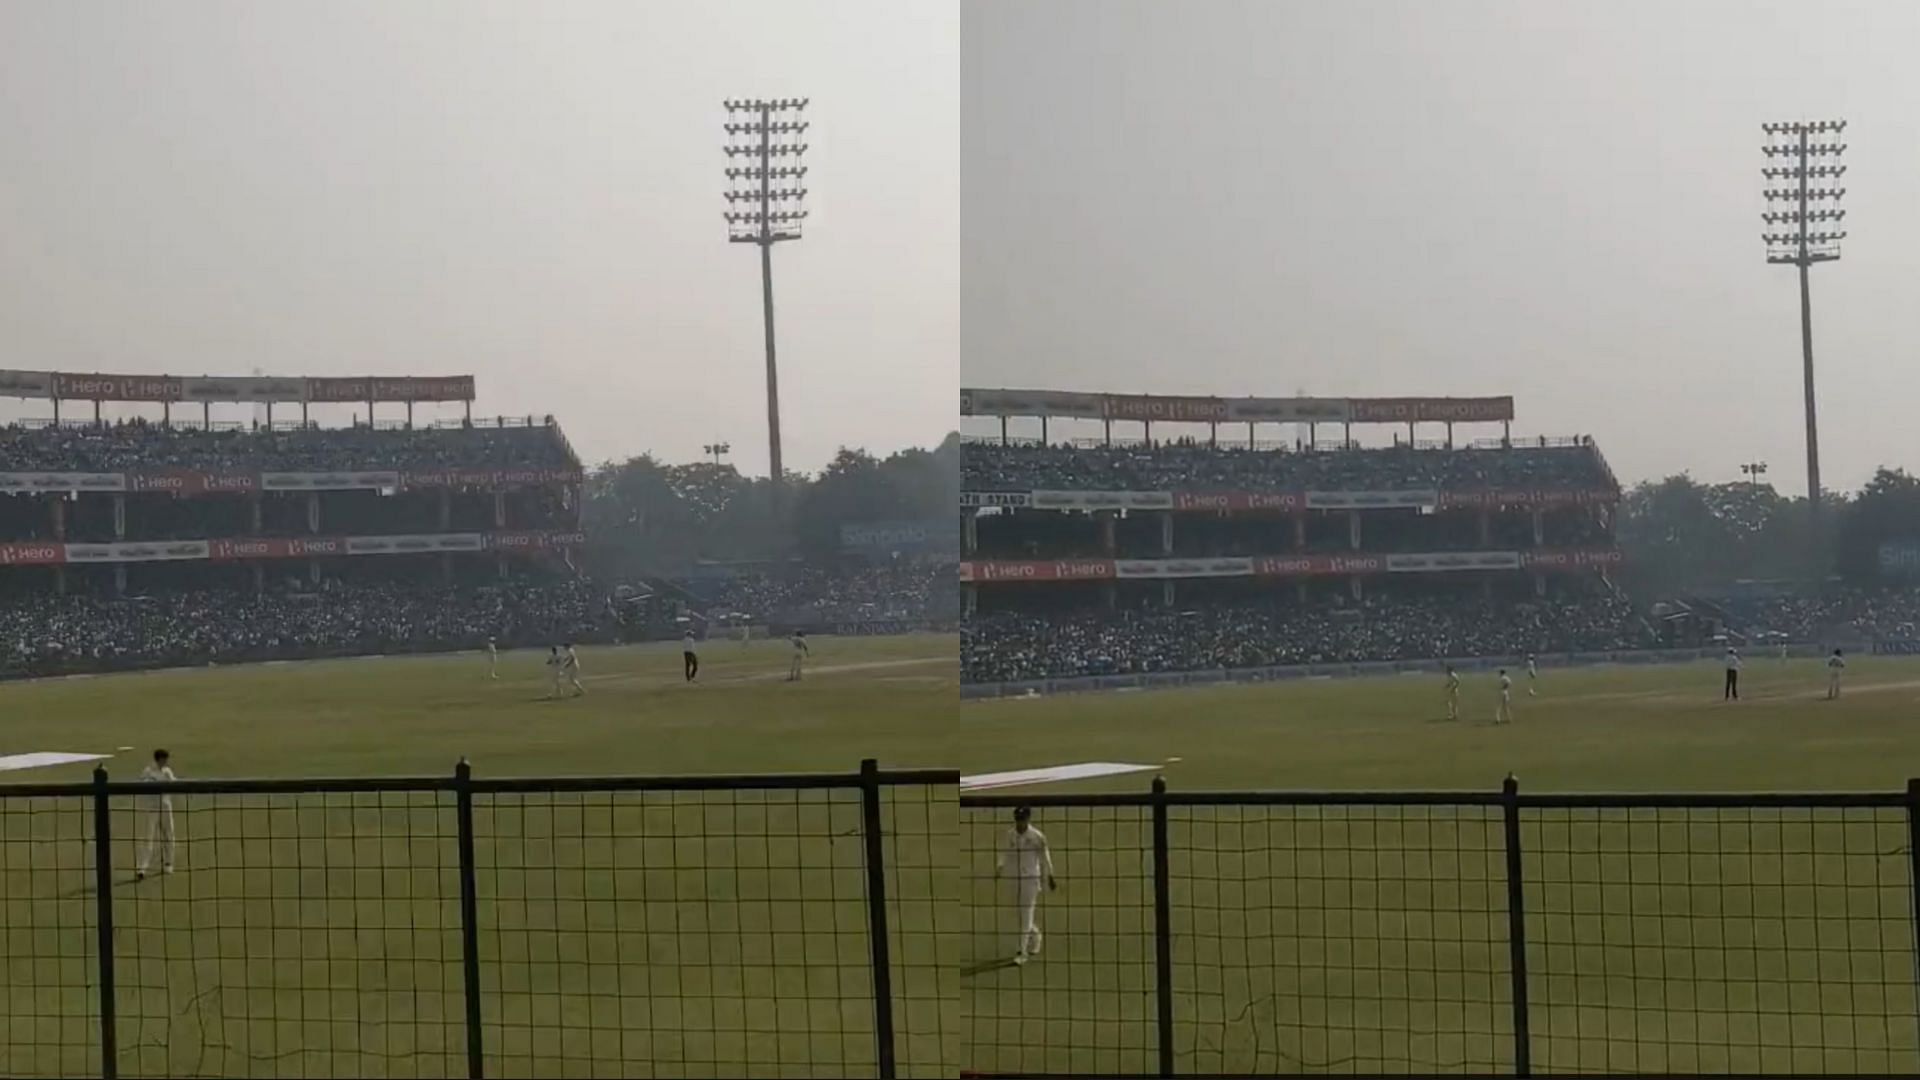 Fans in Delhi tried to annoy the Australians (Image: Twitter)